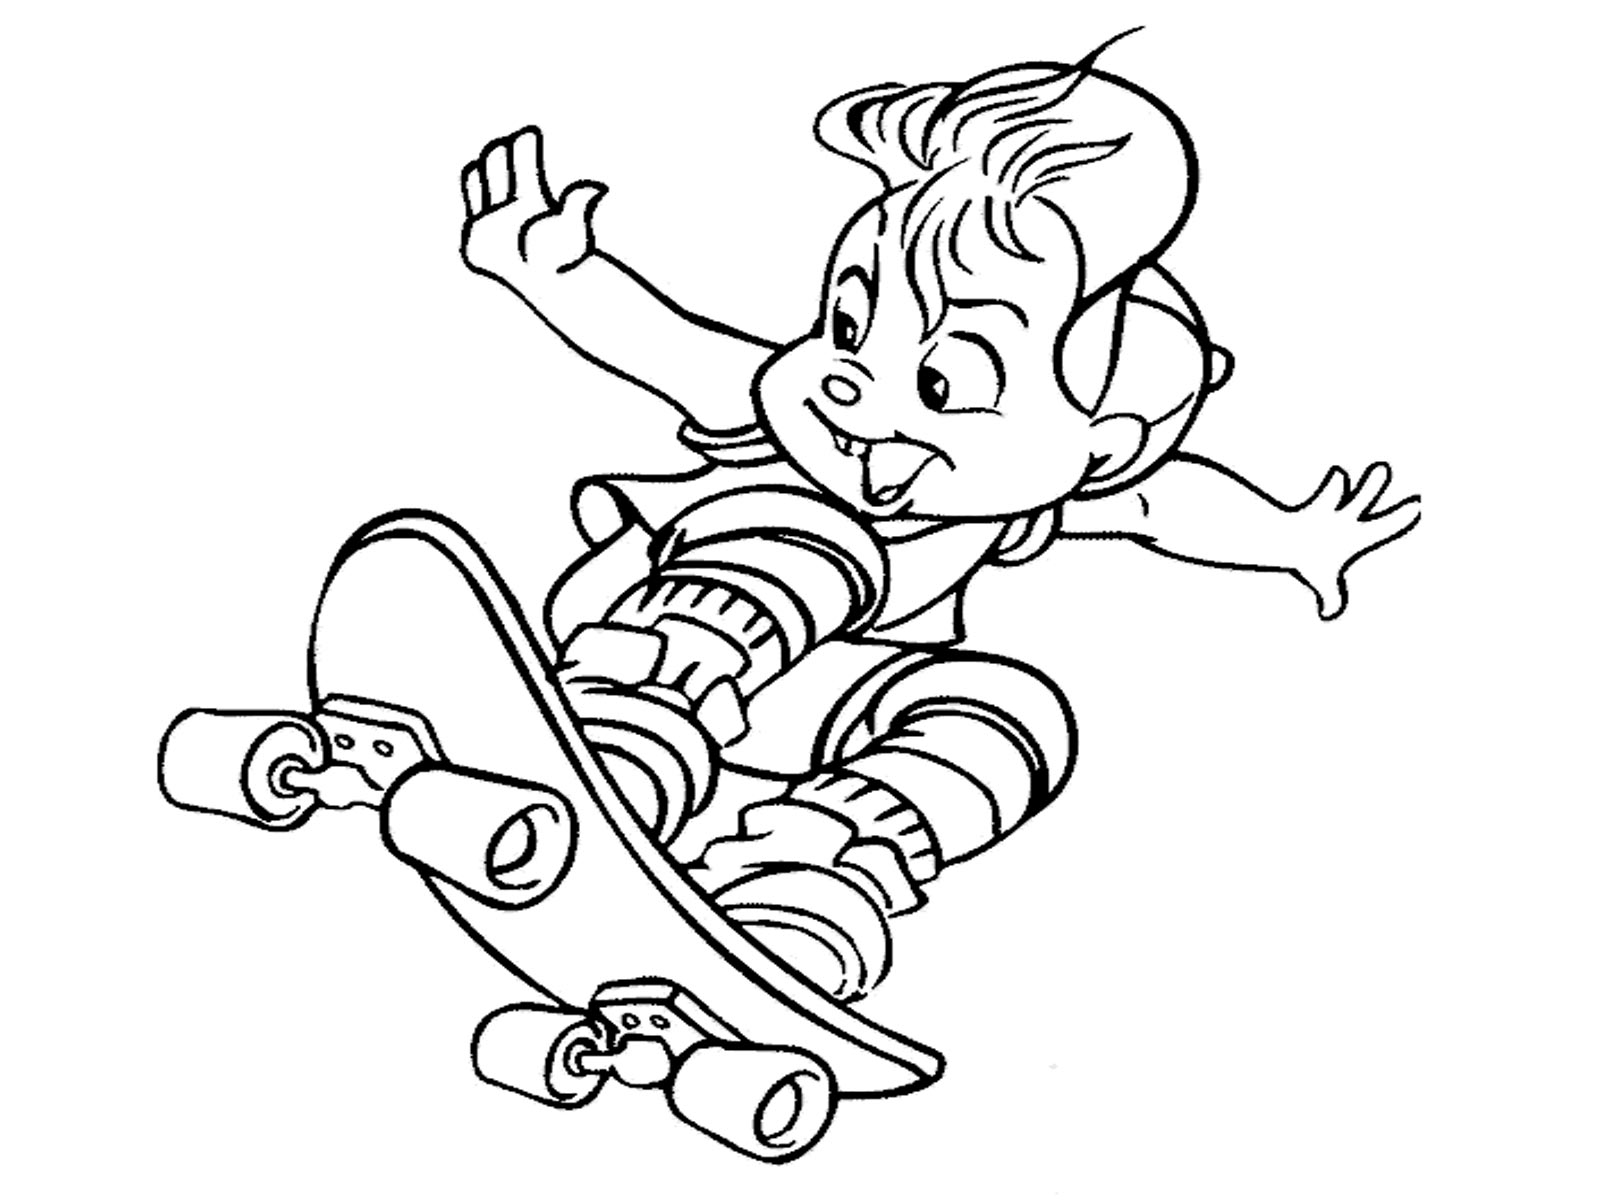 Alvin And The Chipmunks Coloring Pages | Realistic Coloring Pages